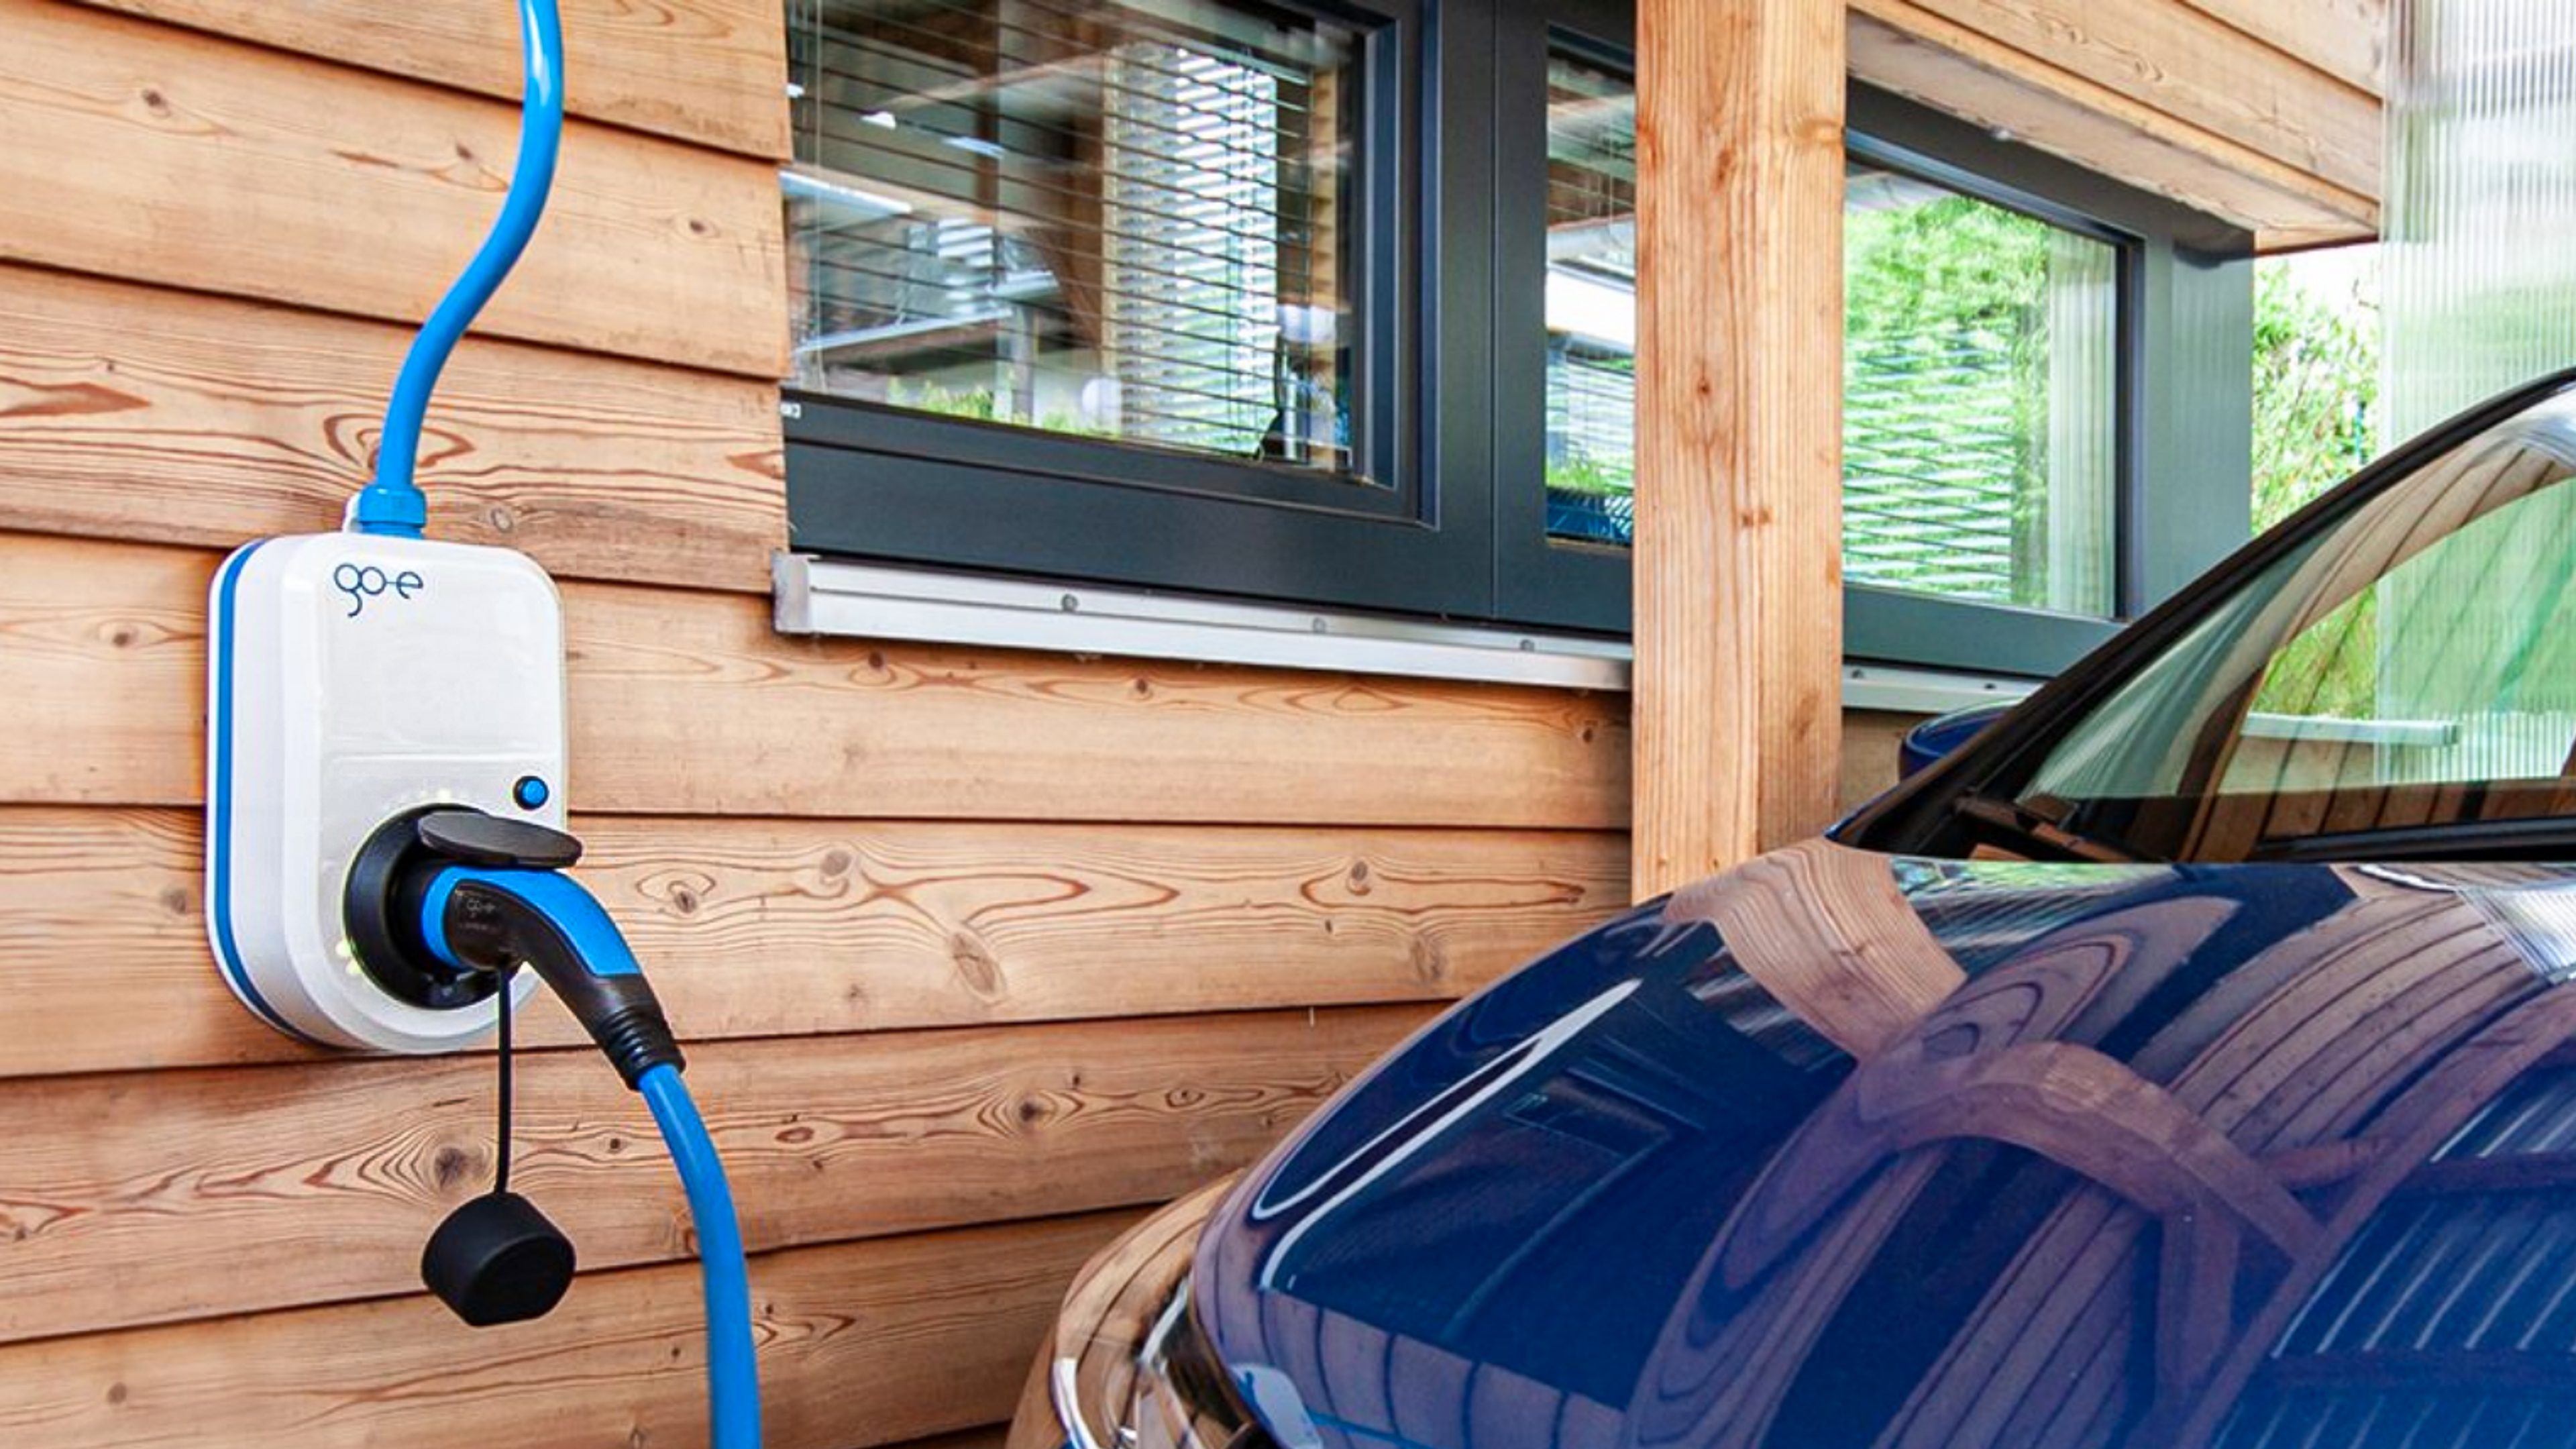 Everything You Need to Know About Charging an EV at Home